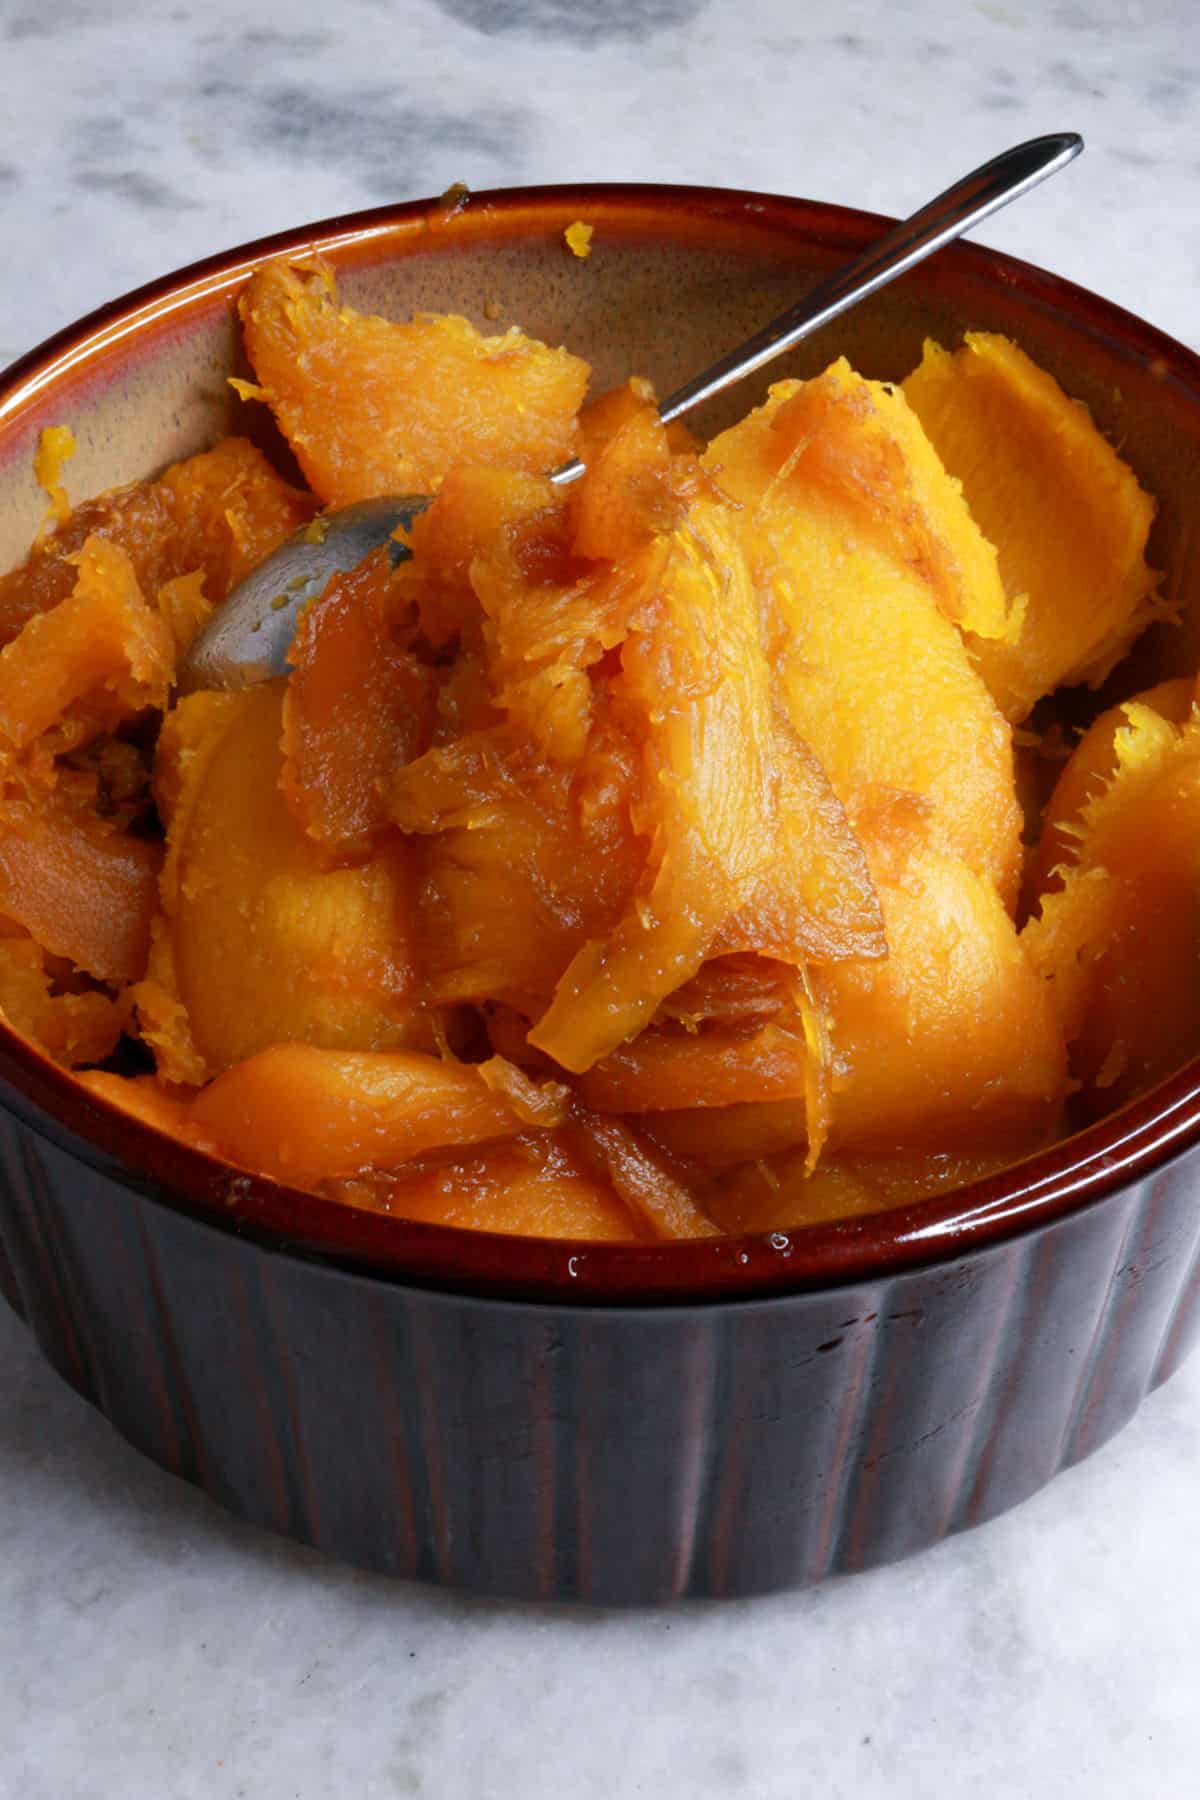 Cooked pumpkin in a bowl